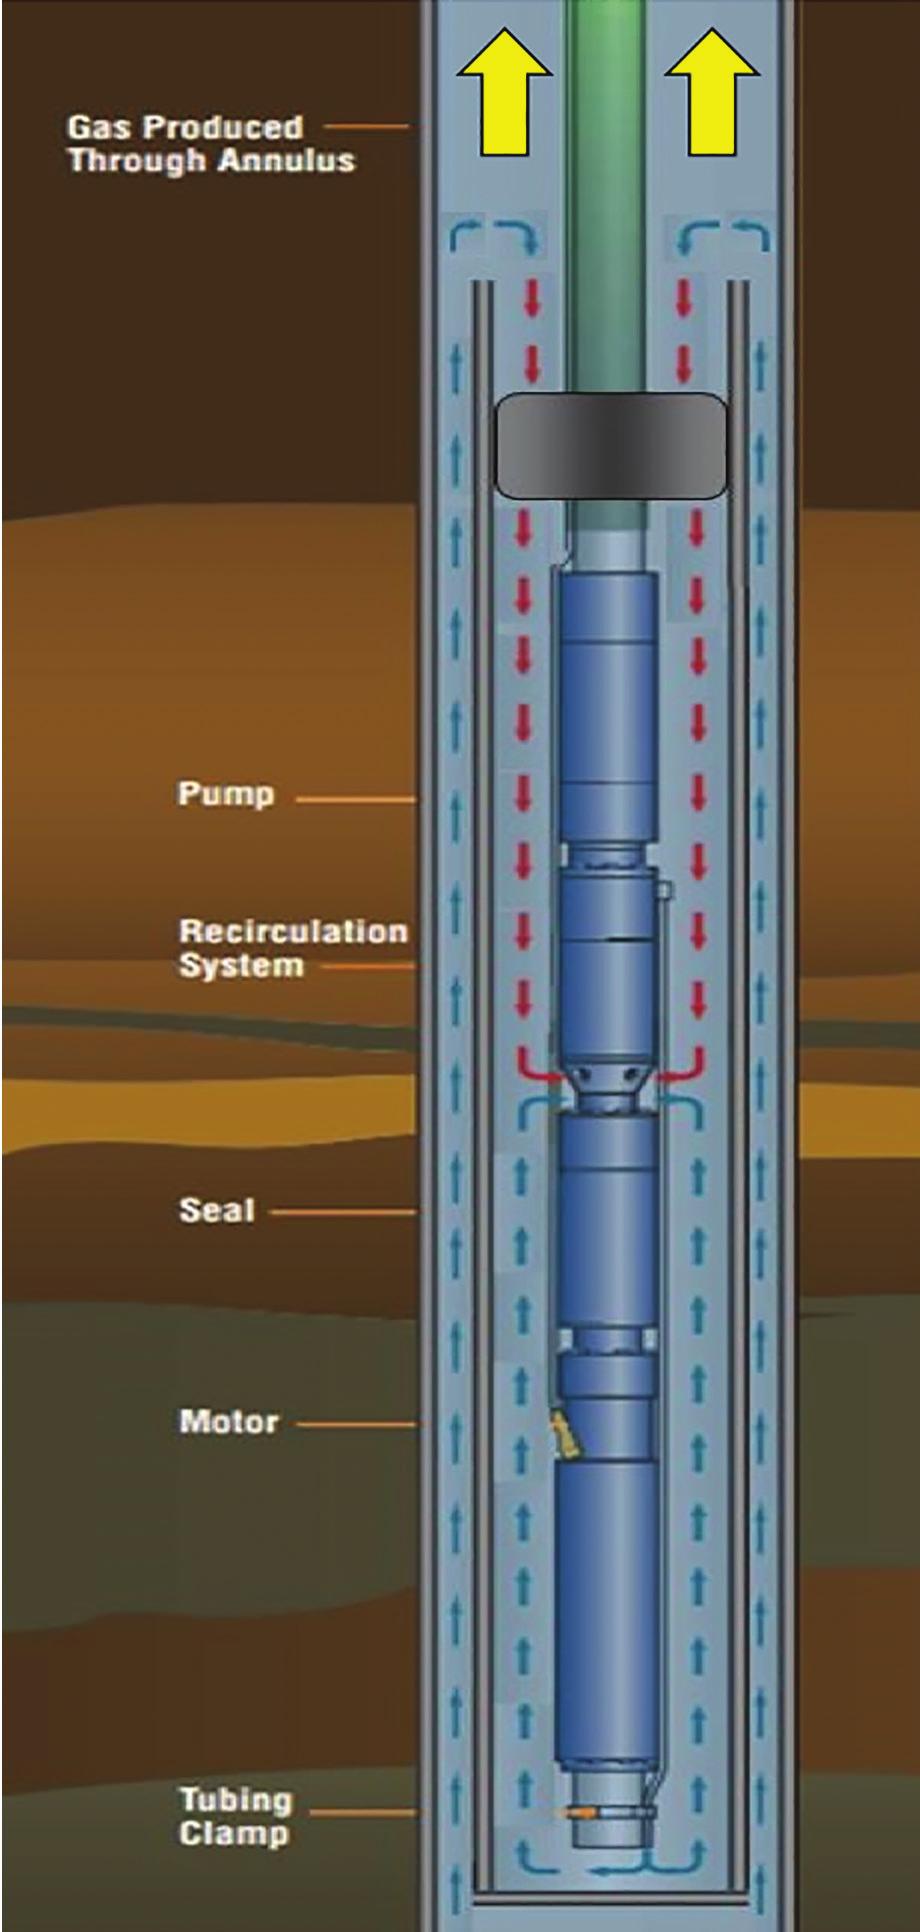 and from downhole pressure changes. For wells with high eliminate costly system change outs as production declines.